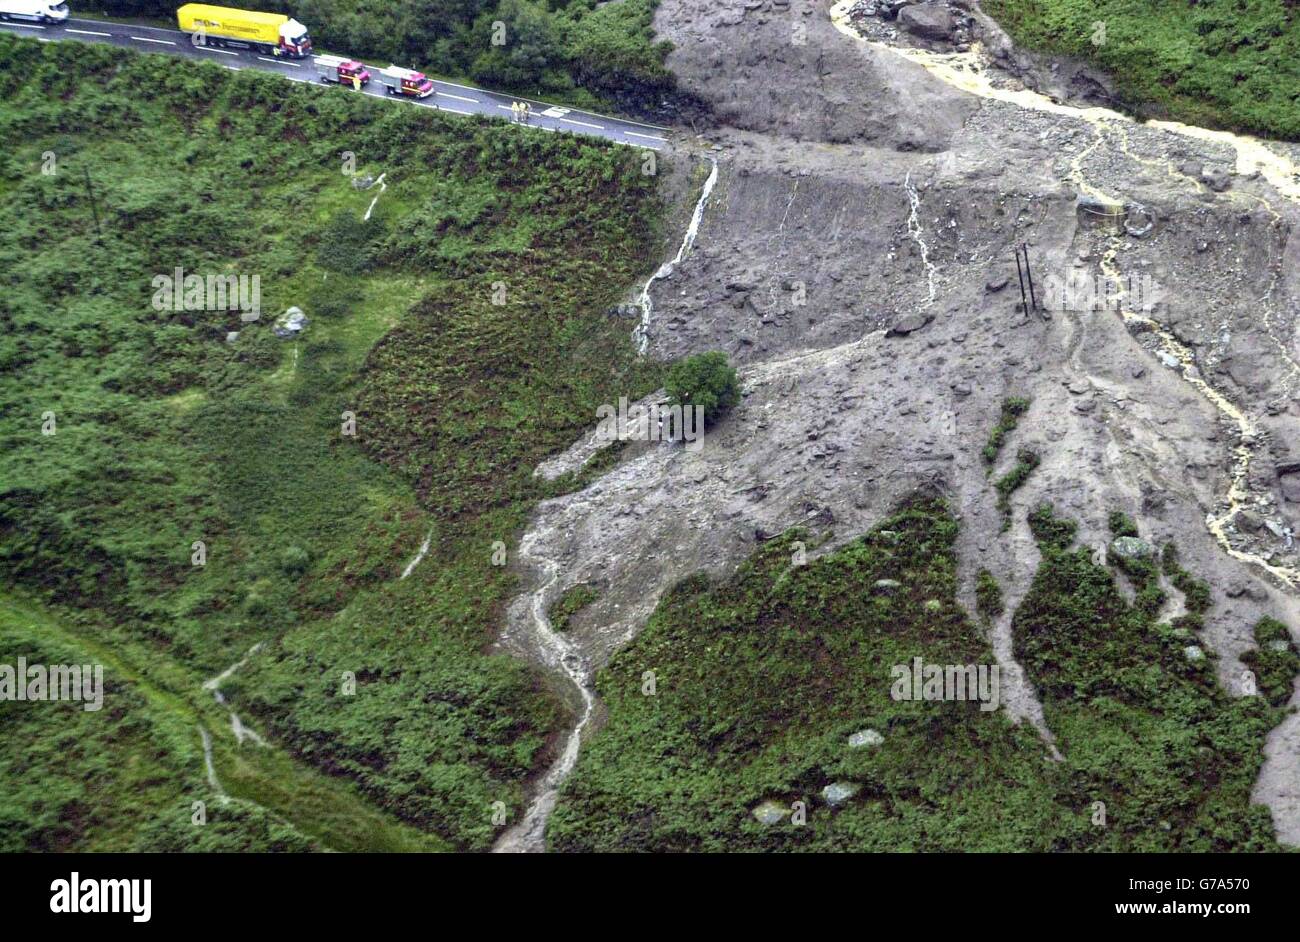 The scene after two landslides blocked a major road with thousands of tonnes of mud and trapped more than 50 people in their vehicles. The RAF, Royal Navy and central Scotland emergency services were involved in the dramatic three-hour bid to airlift motorists stranded on a stretch of the A85 through Glen Ogle, near Callander. 08/10/04: A new centre which will research means to prevent landslips is to open its doors. The 1.25 million civil engineering research laboratories in Dundee boast a new centrifuge to allow researchers to test new technologies to prevent landslides. More than 50 people Stock Photo